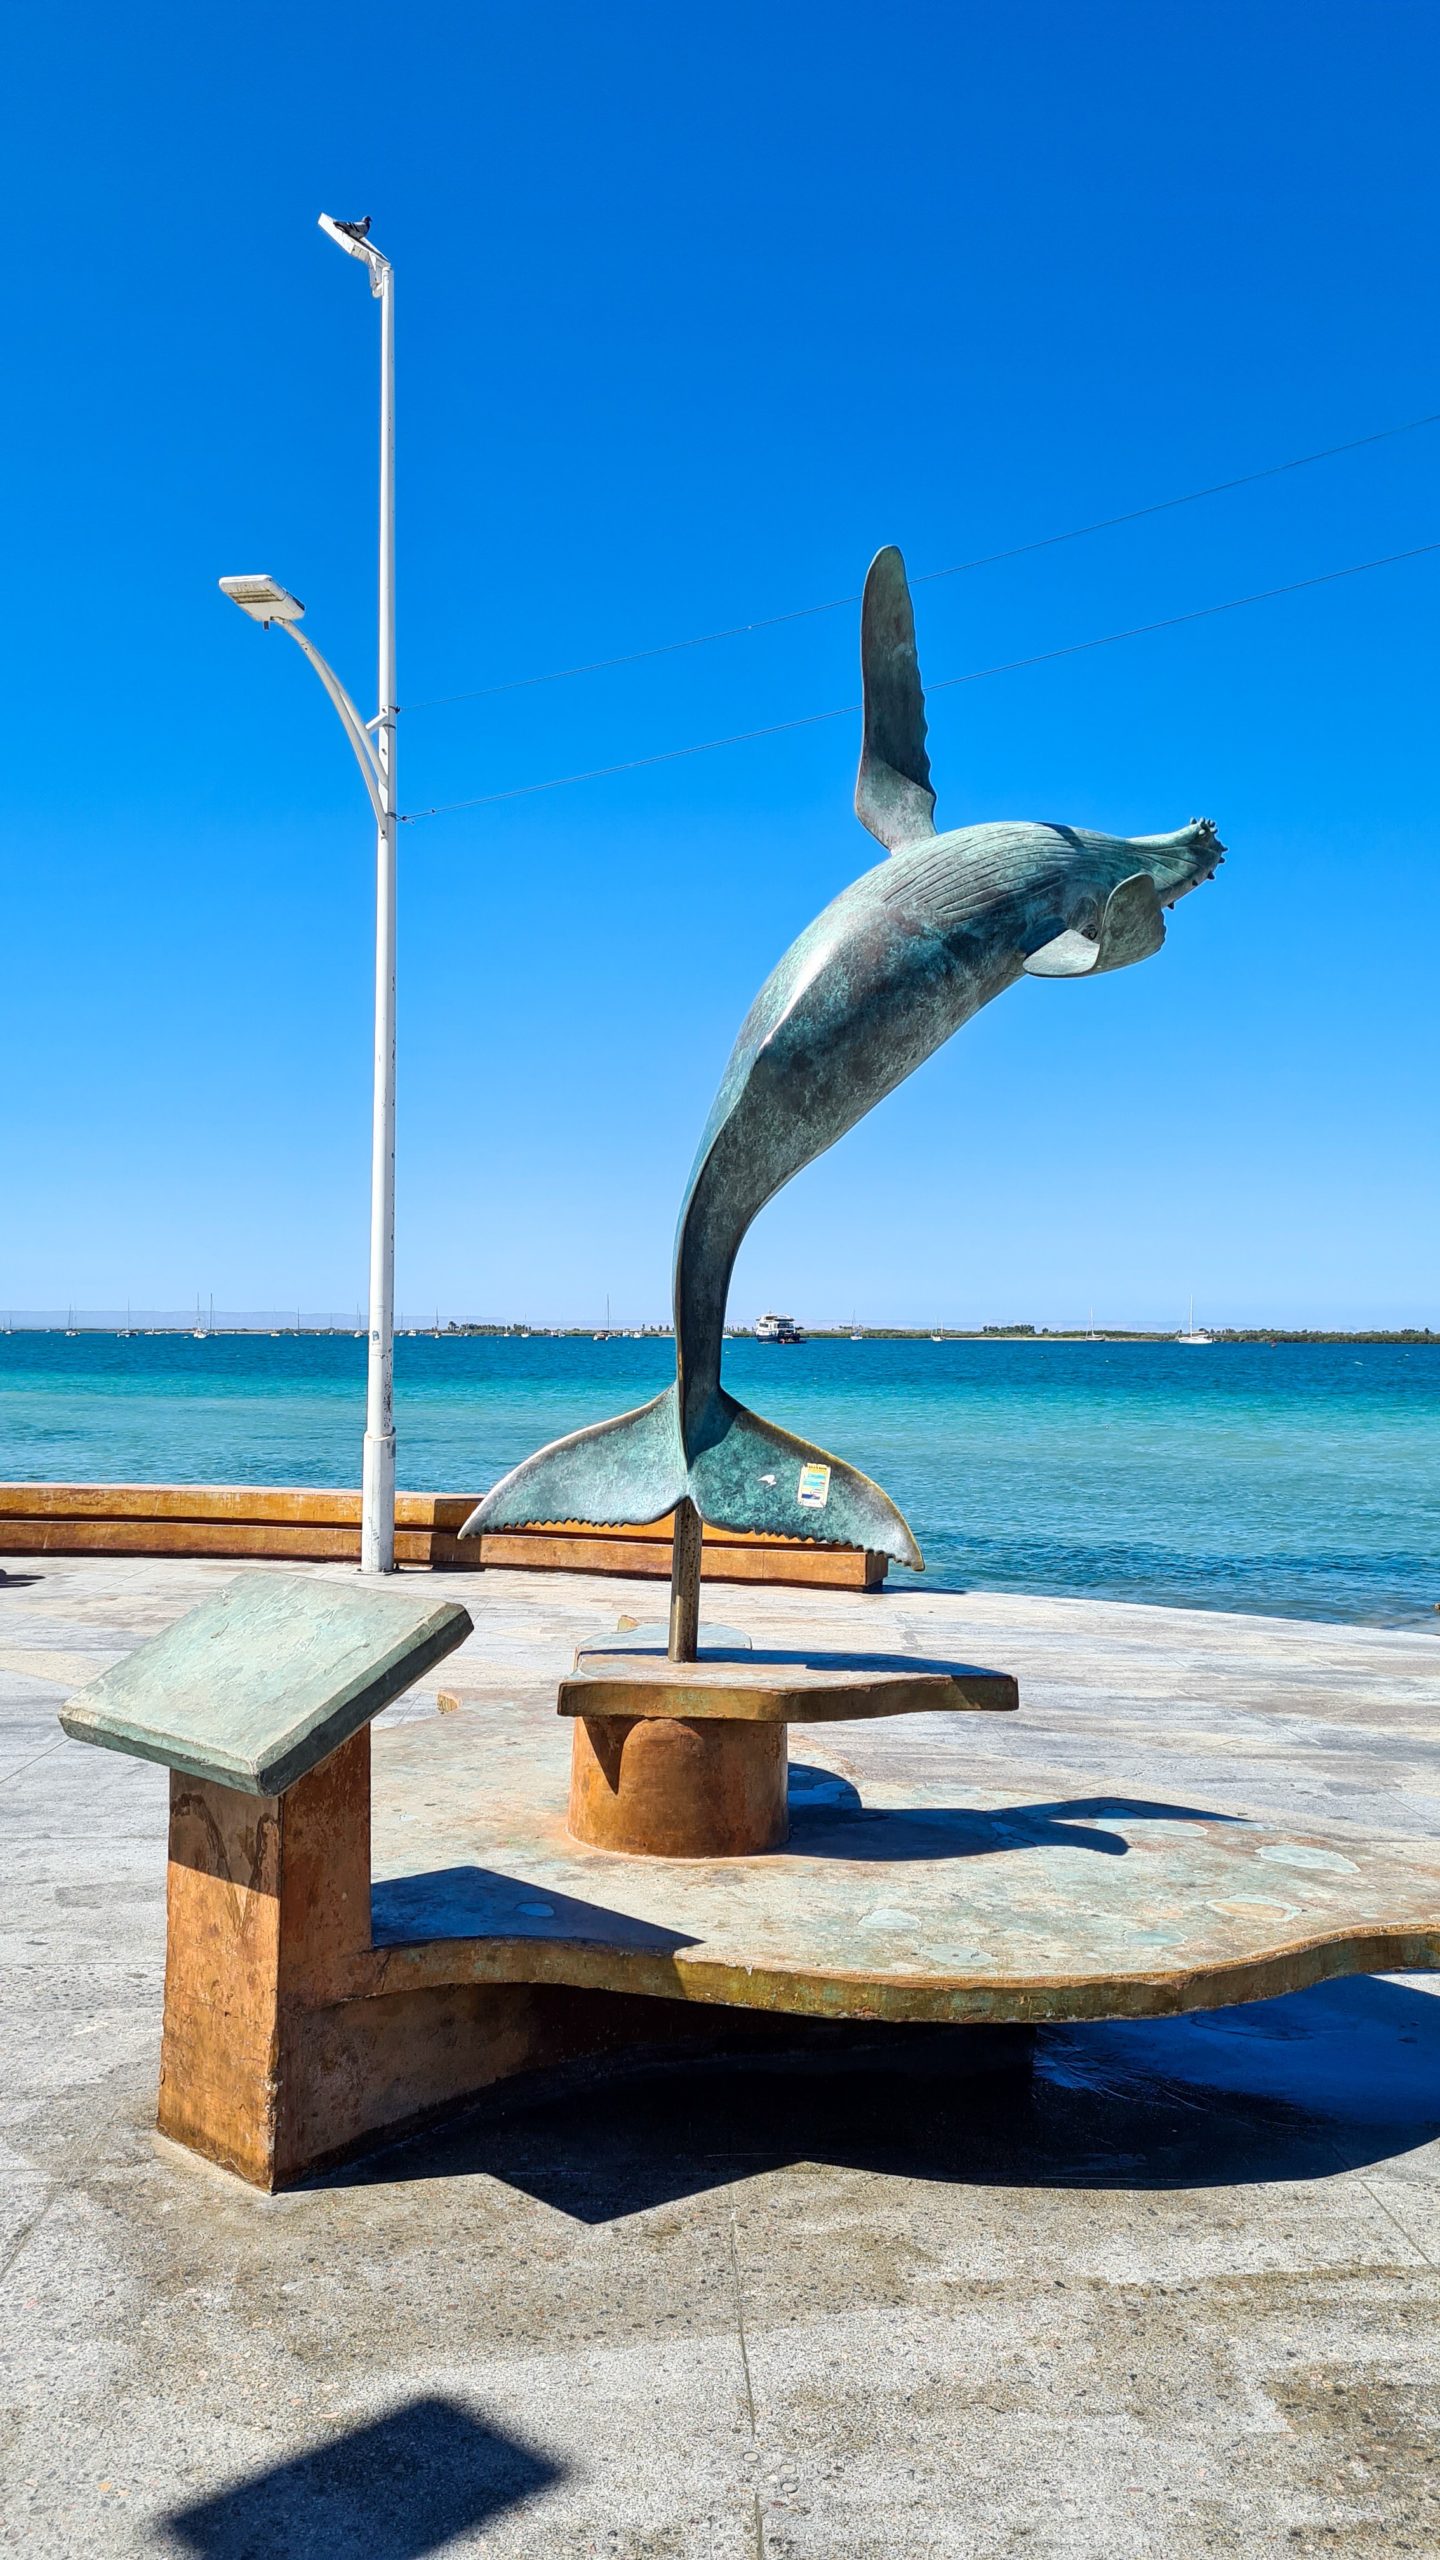 La Paz's Malecon is lined with metal statues of marine animals. This large statue is of a breaching humpback whale.